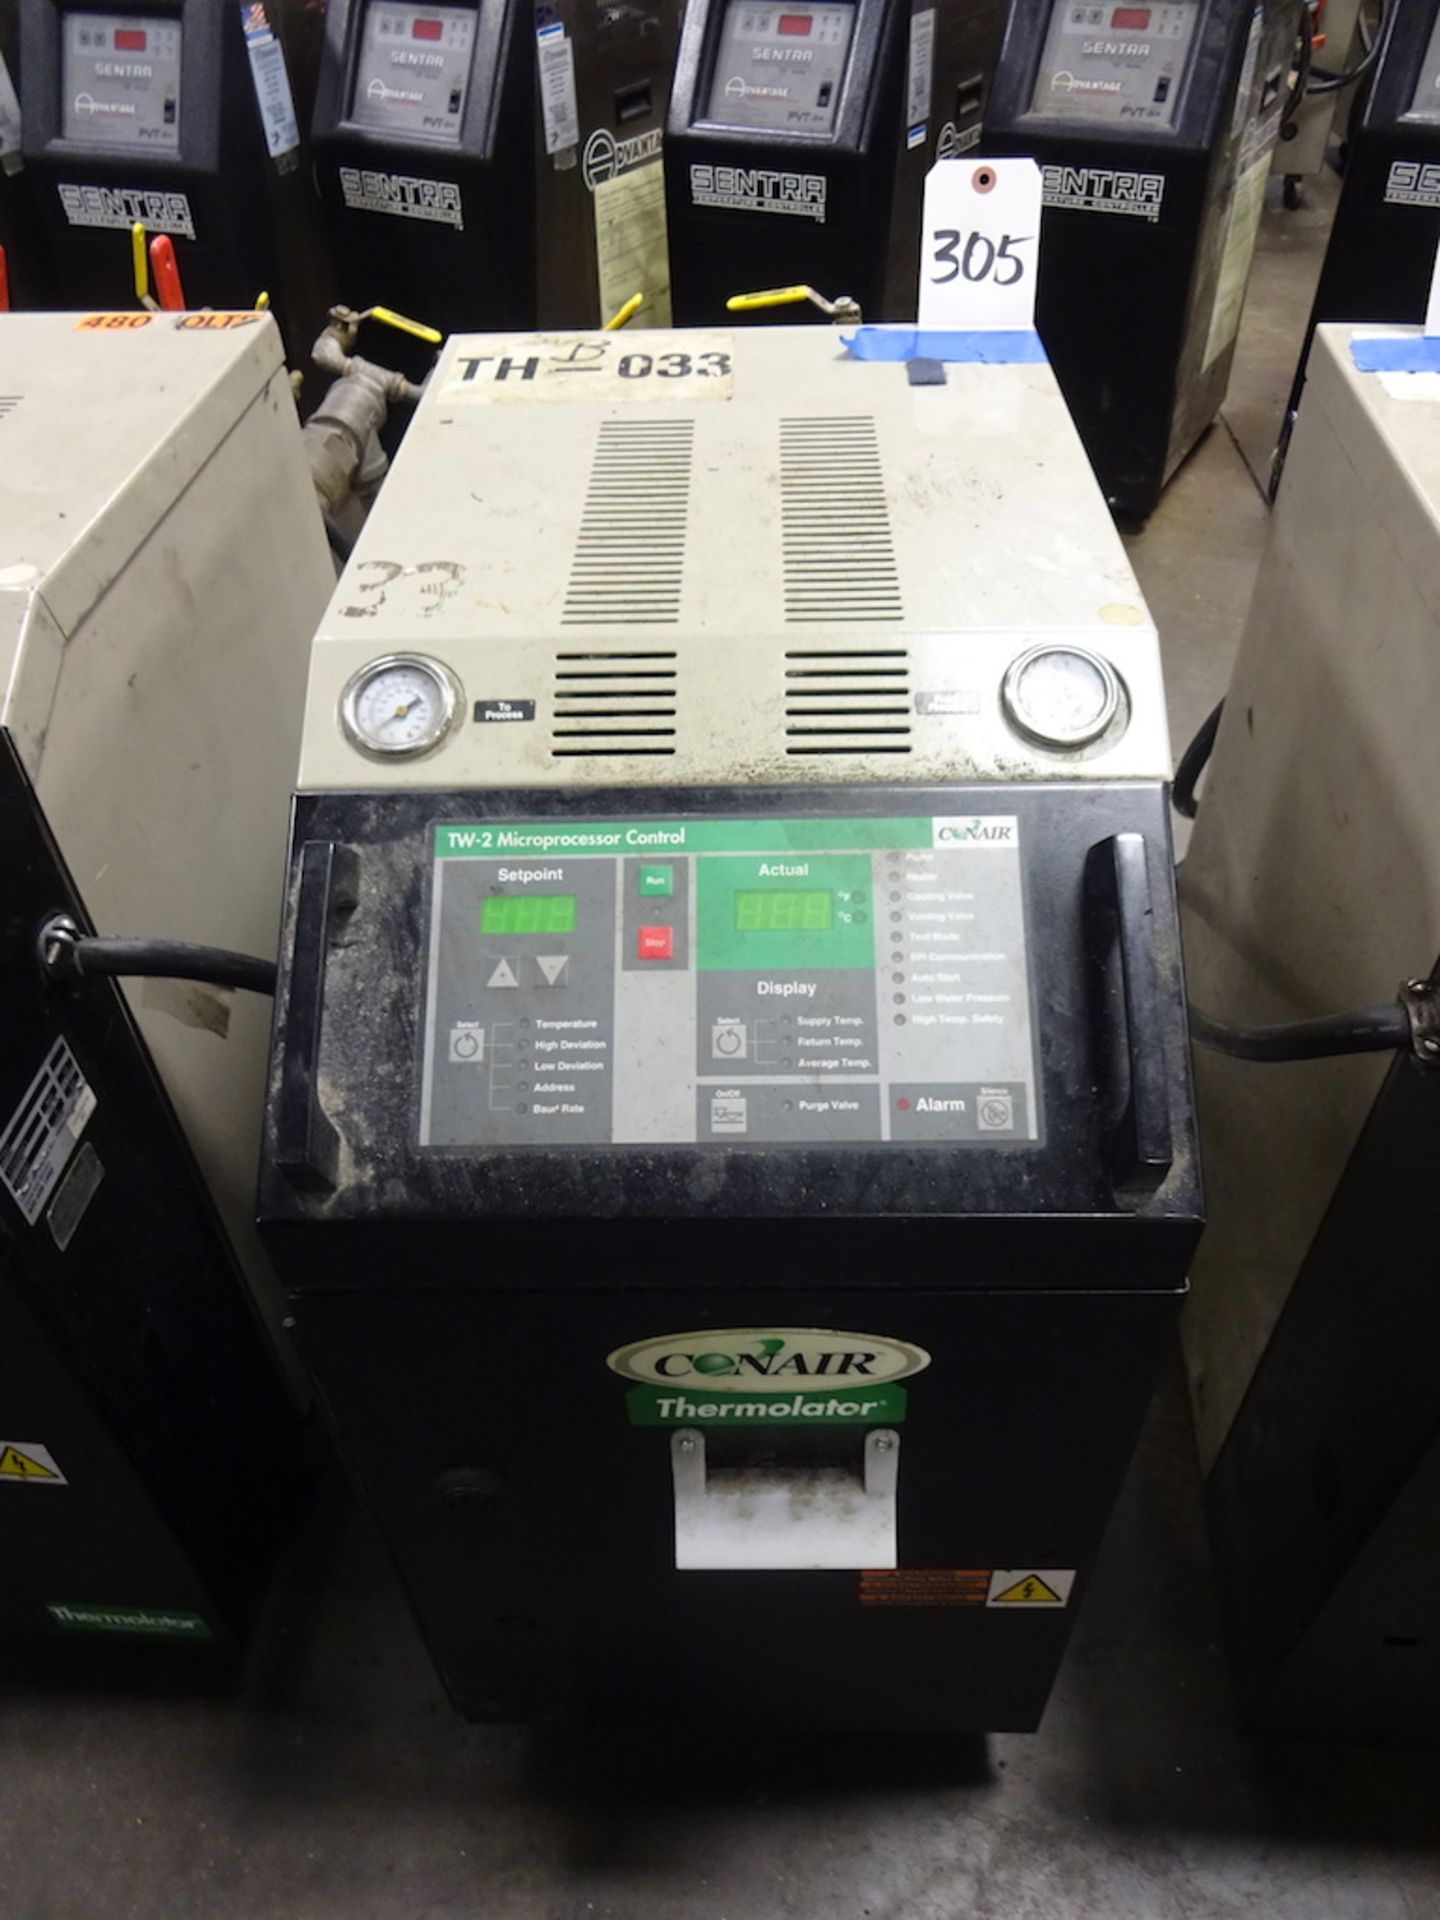 Conair Model TW Thermolator Temperature Controller, S/N 274833, with TW-2 Microprocessor Control